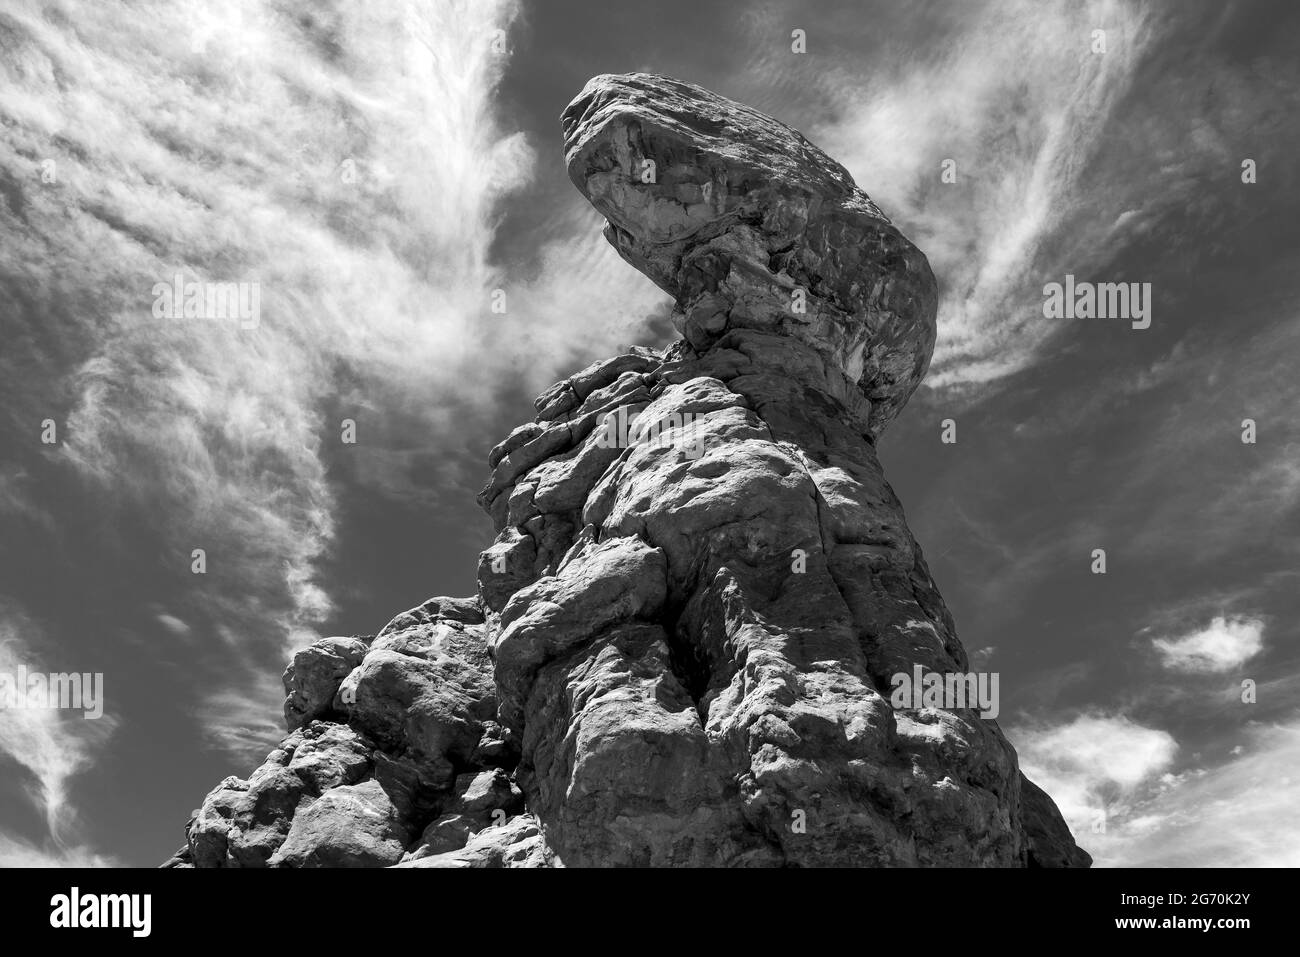 Black and white close up of Balanced Rock formation, Arches national park, Utah, USA. Stock Photo